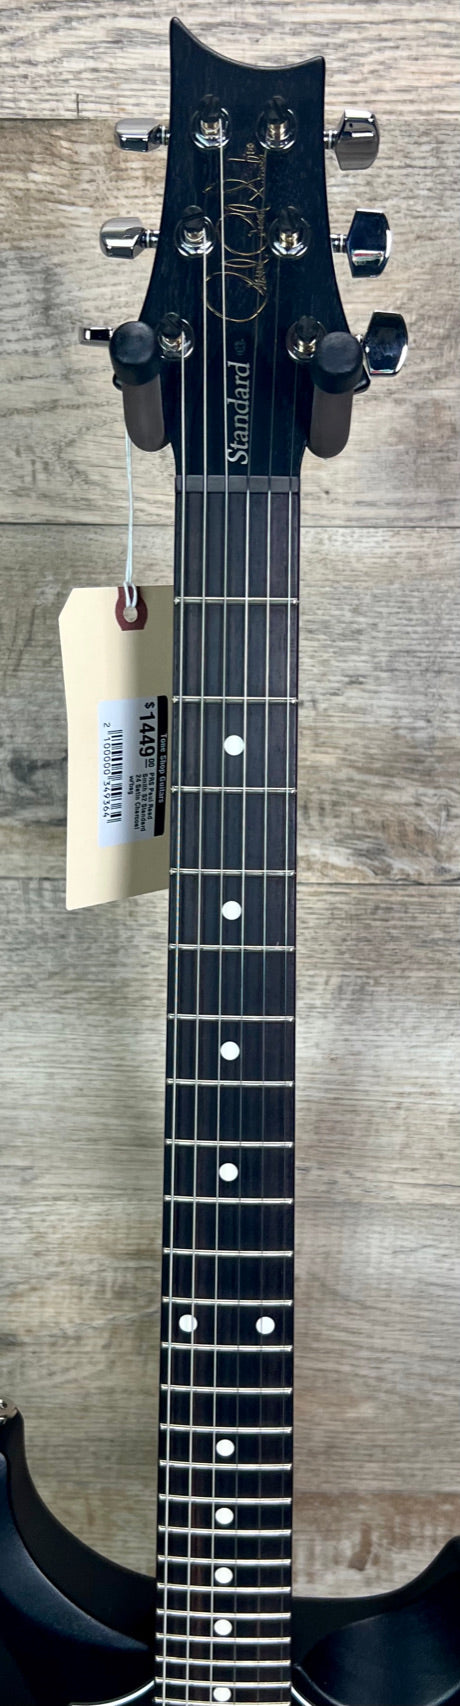 Neck and headstock of PRS Paul Reed Smith S2 Standard 24 Satin Charcoal.